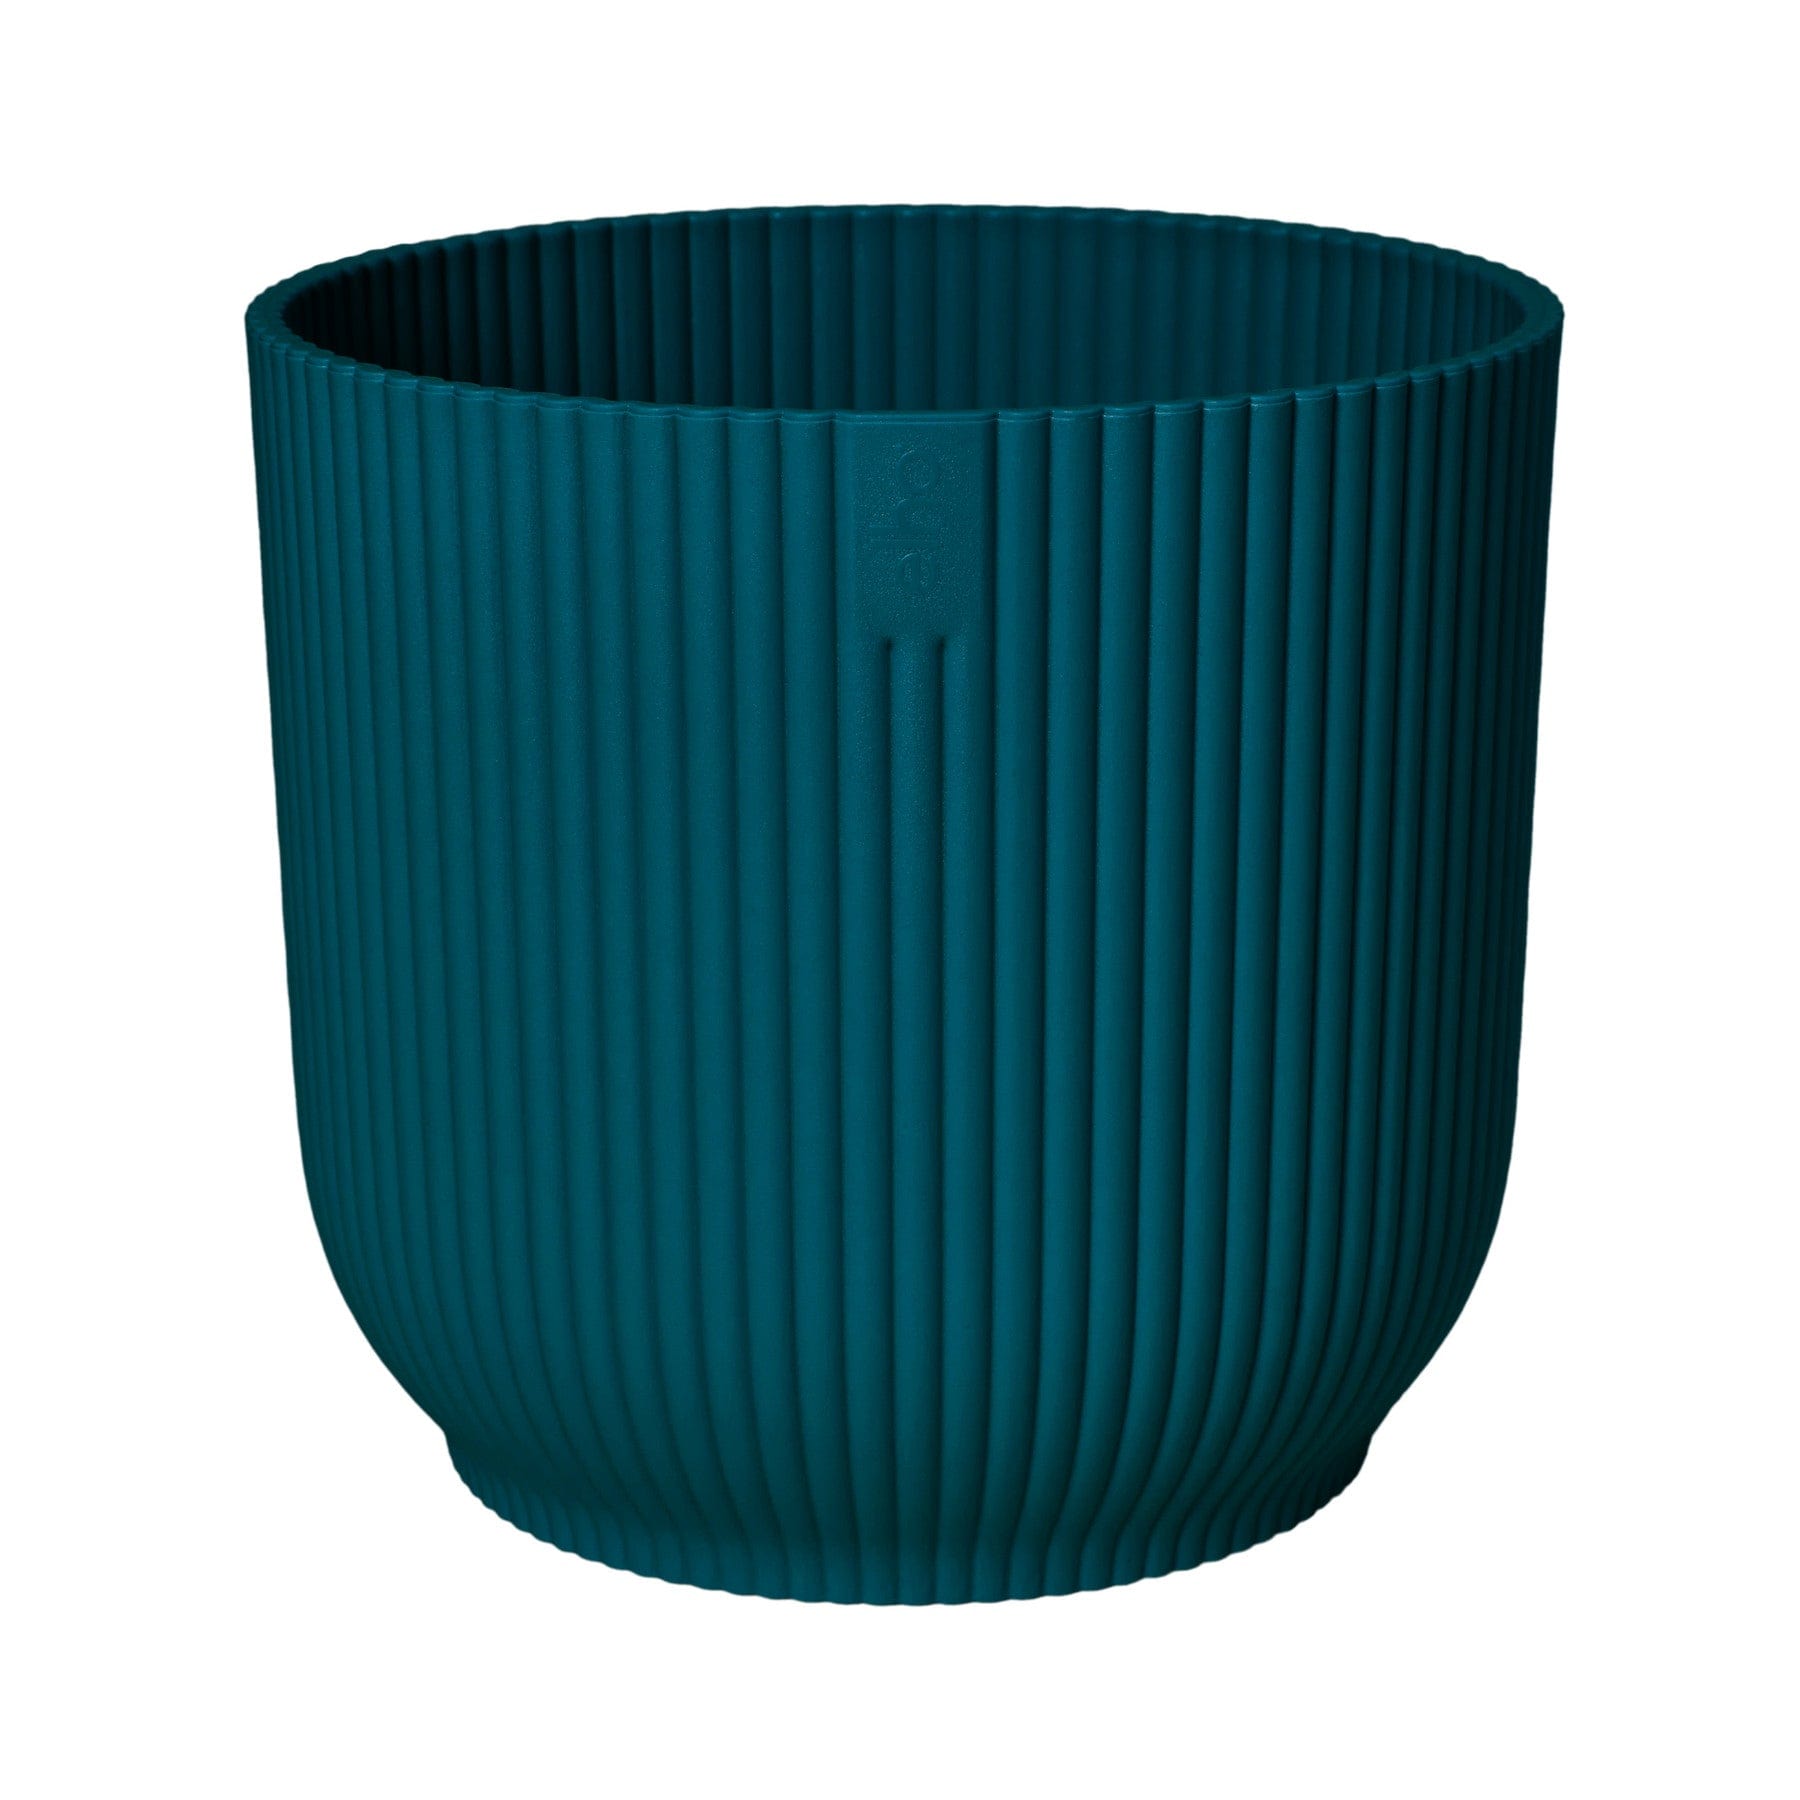 Teal ribbed planter, round indoor decorative pot, modern home decor, minimalist flower container design, isolated on white background.